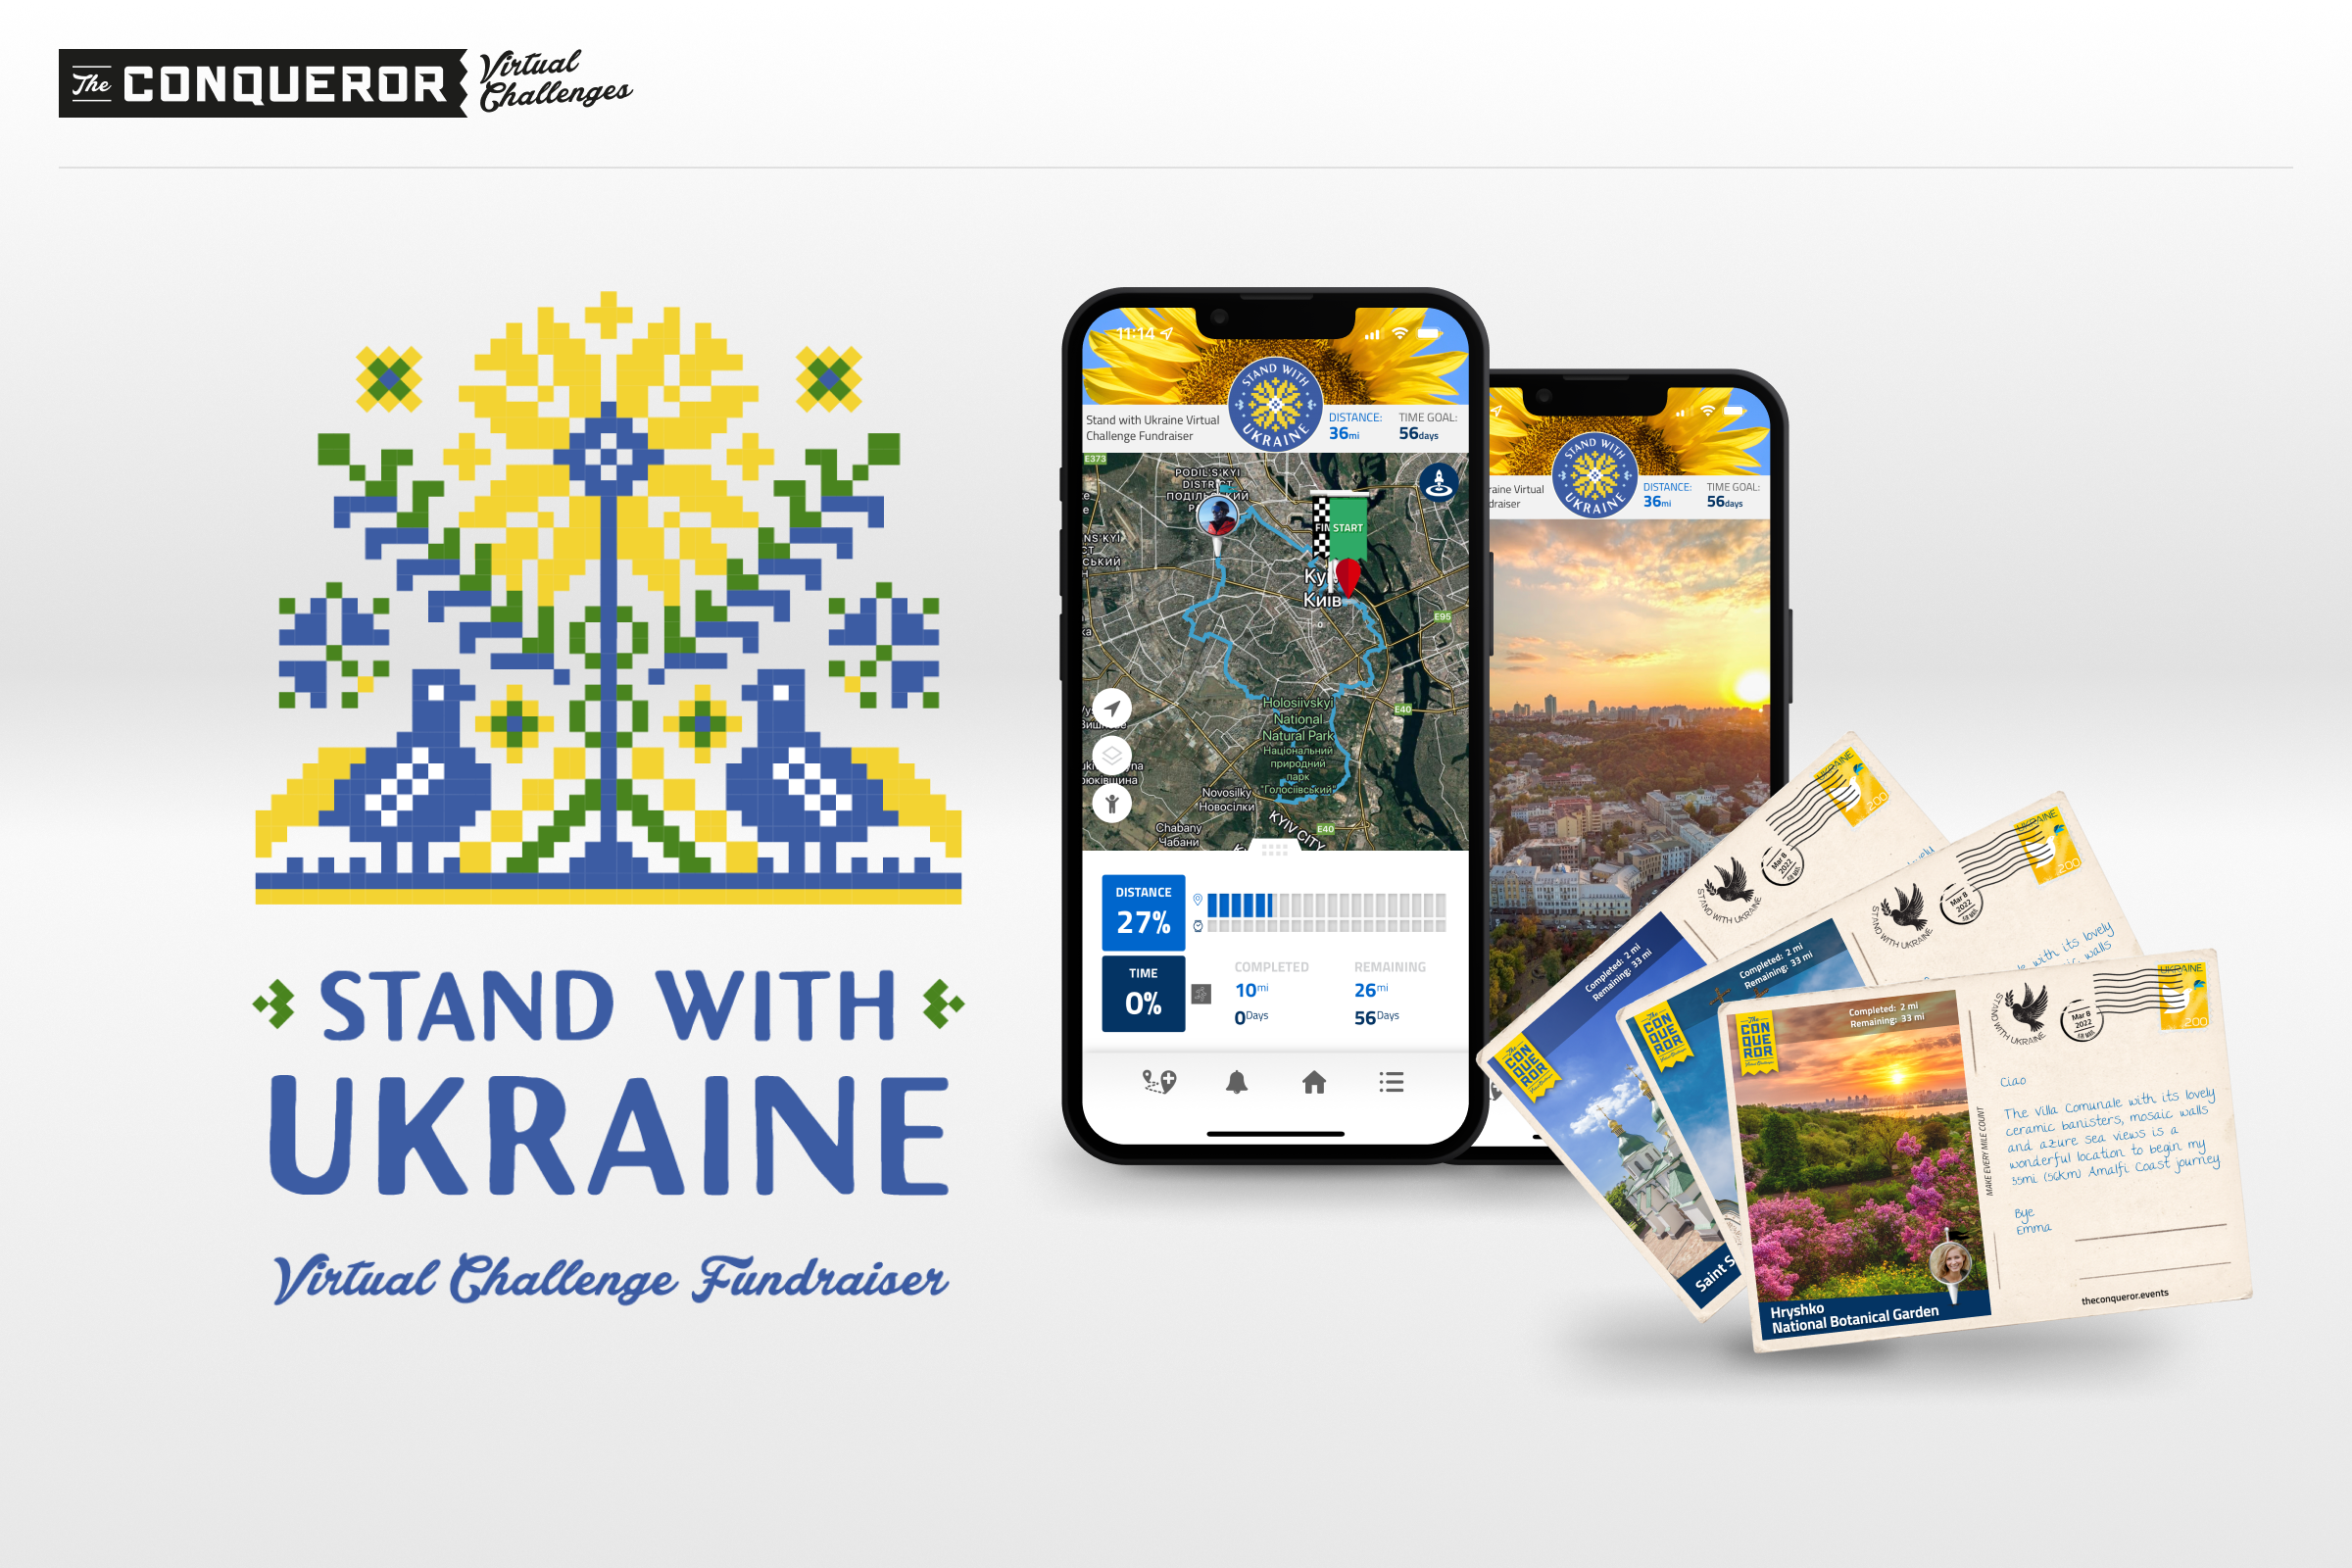 The Conqueror mobilizes global community to donate USD 500,000 in one week delivering aid and immediate resources to Ukraine